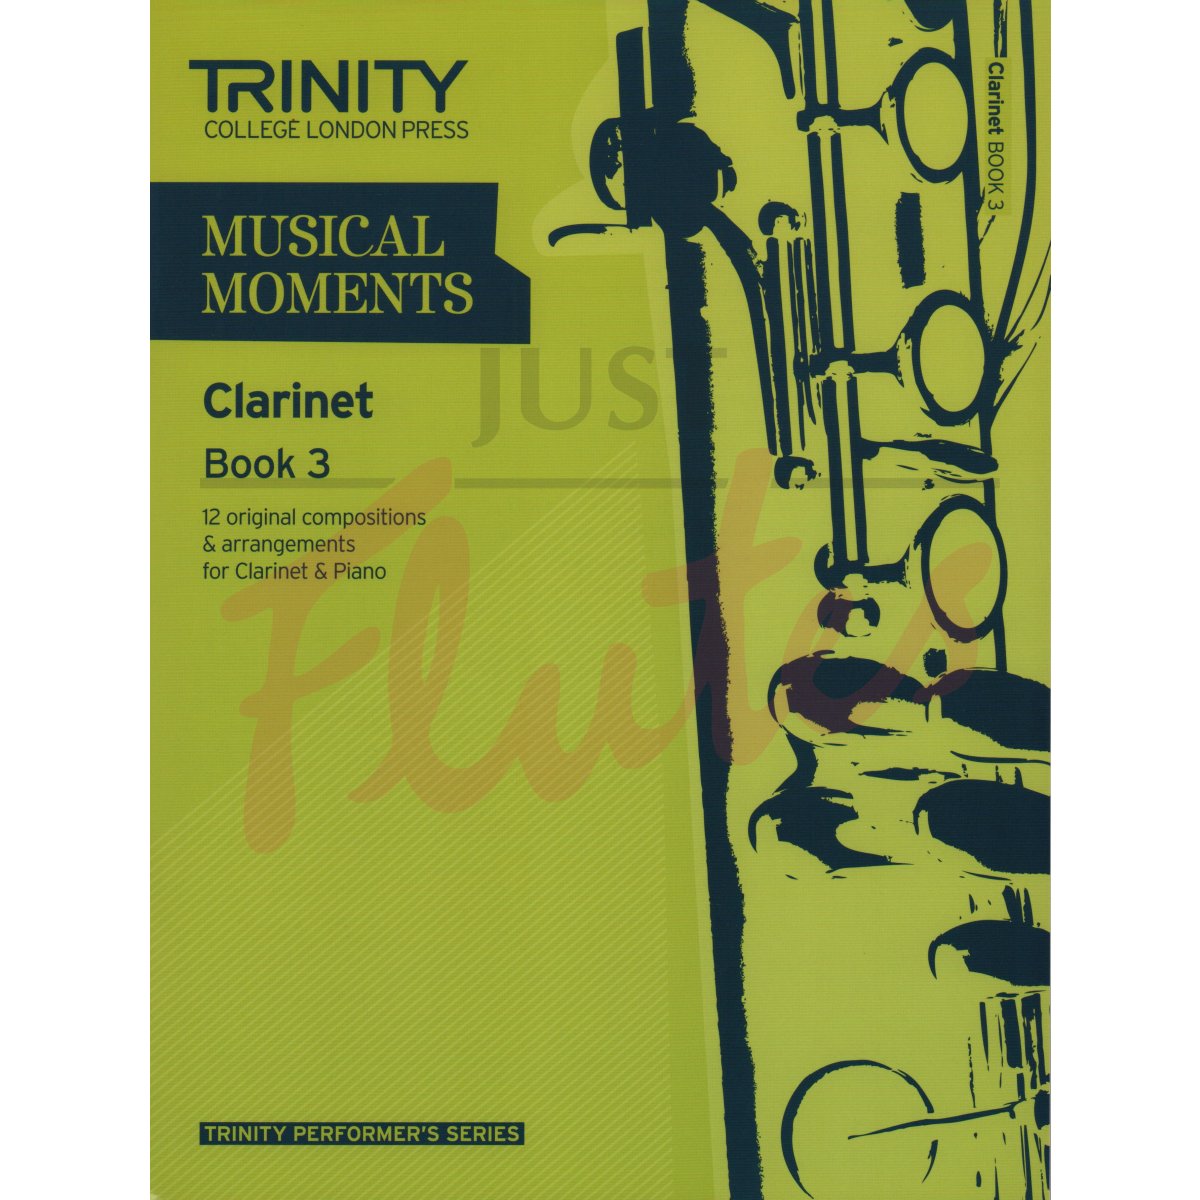 Musical Moments [Clarinet]